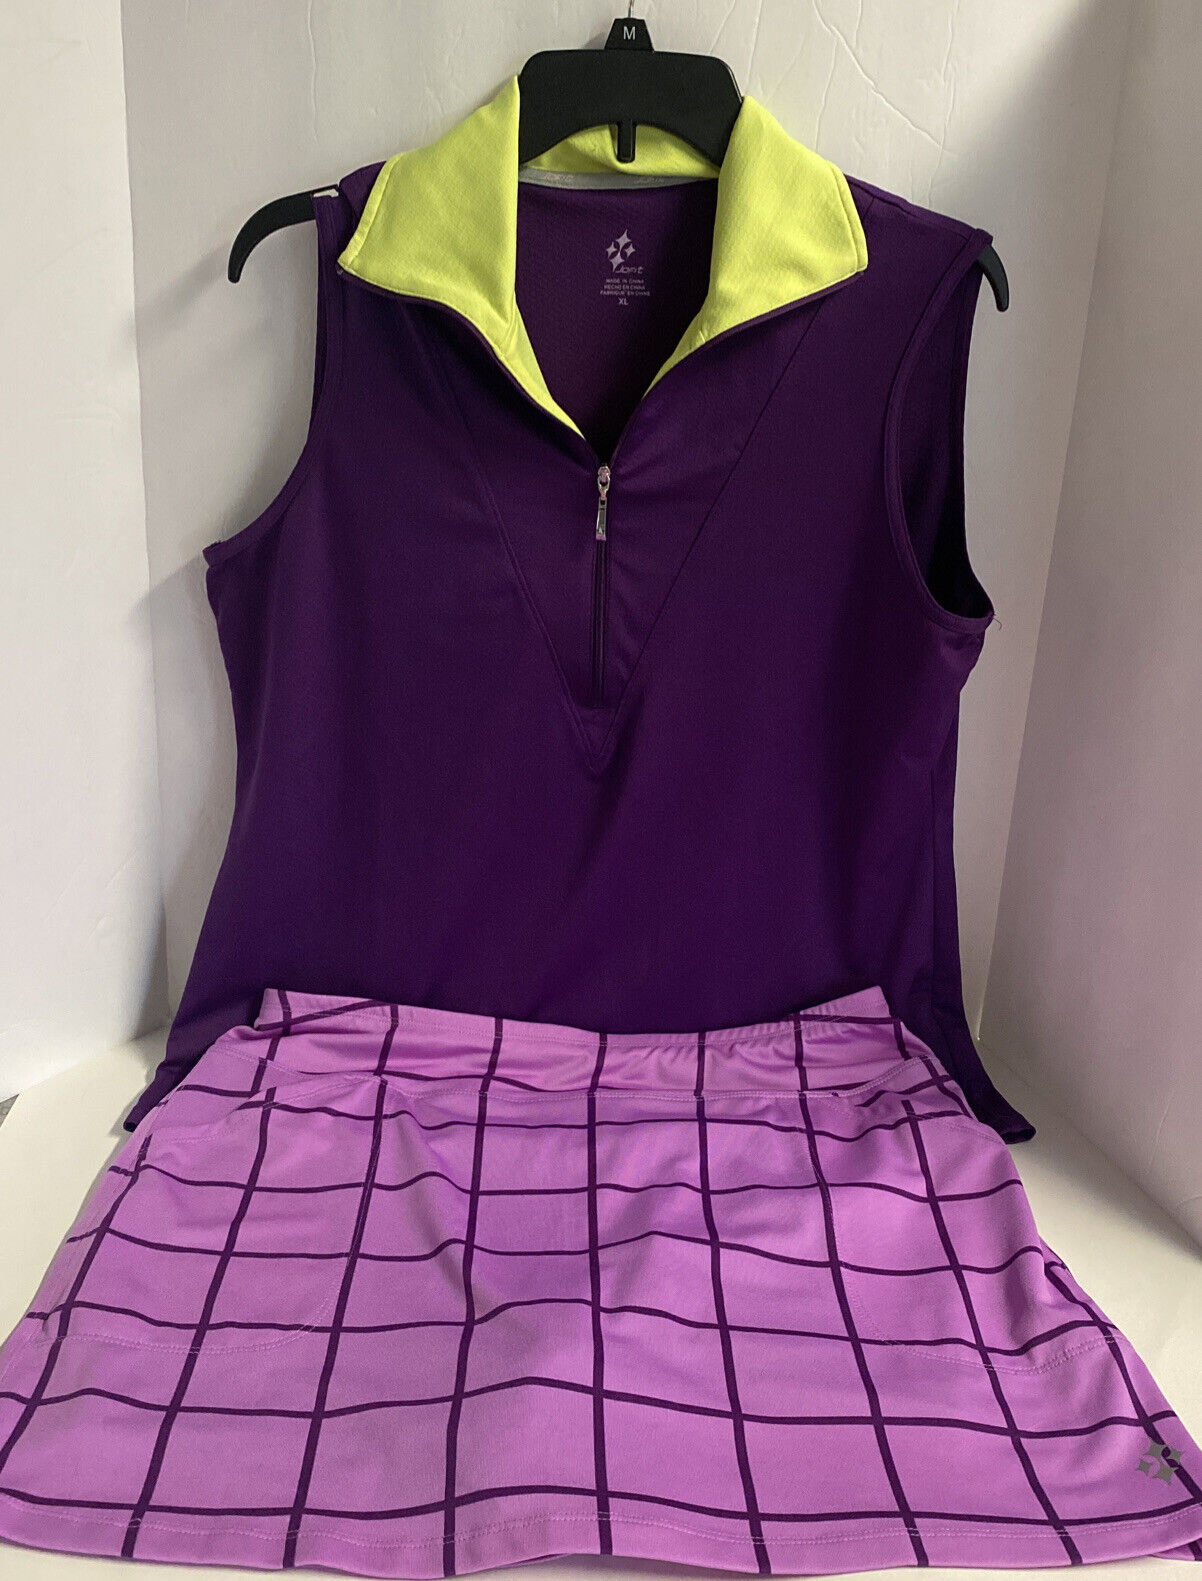 Jofit Golf Outfit Size Xl Top And Skort Purple. Worn Once Pockets!